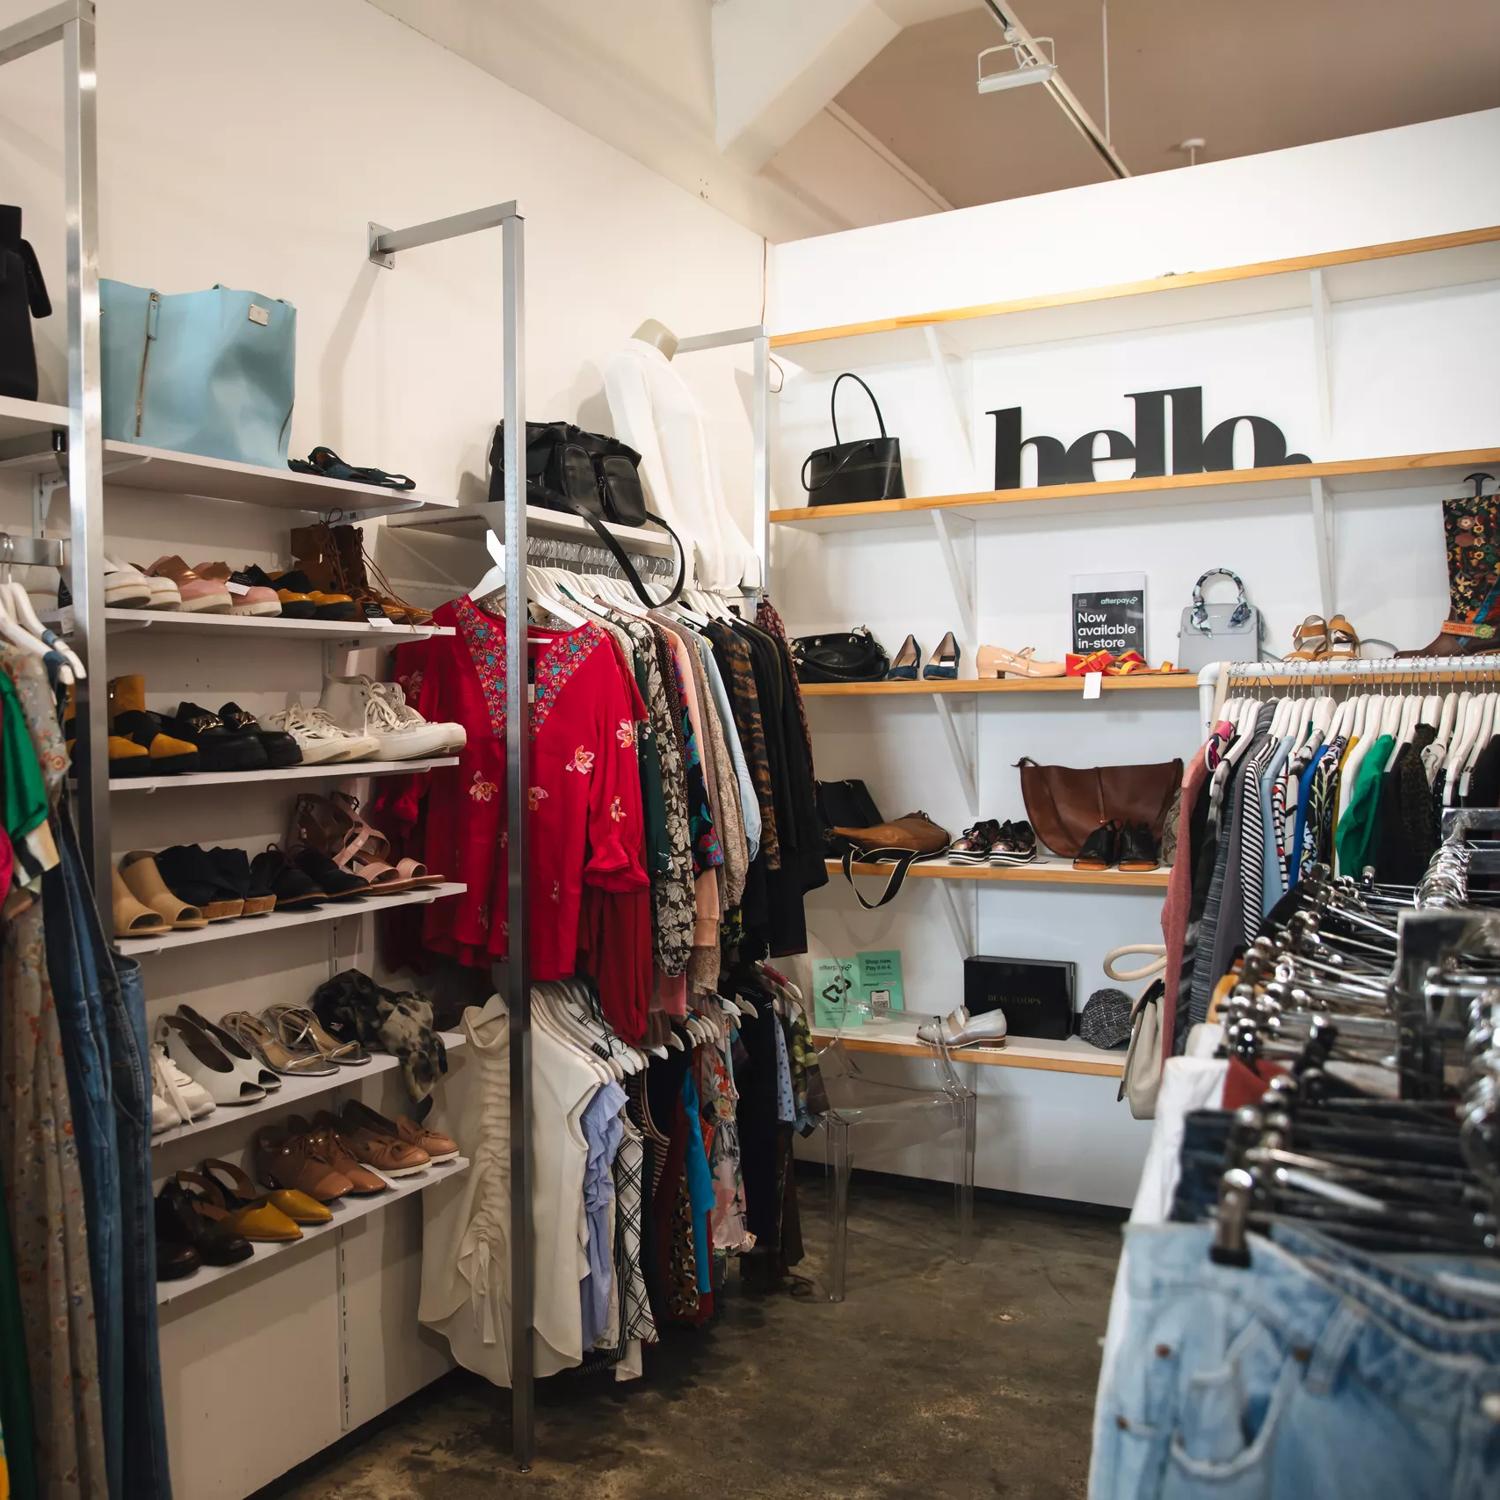 The interior of Honour, a secondhand clothing store located on Vivian Street in Te Aro, Wellington. The space has concrete floors, clothing racks, and shelves with purses and shoes on display.